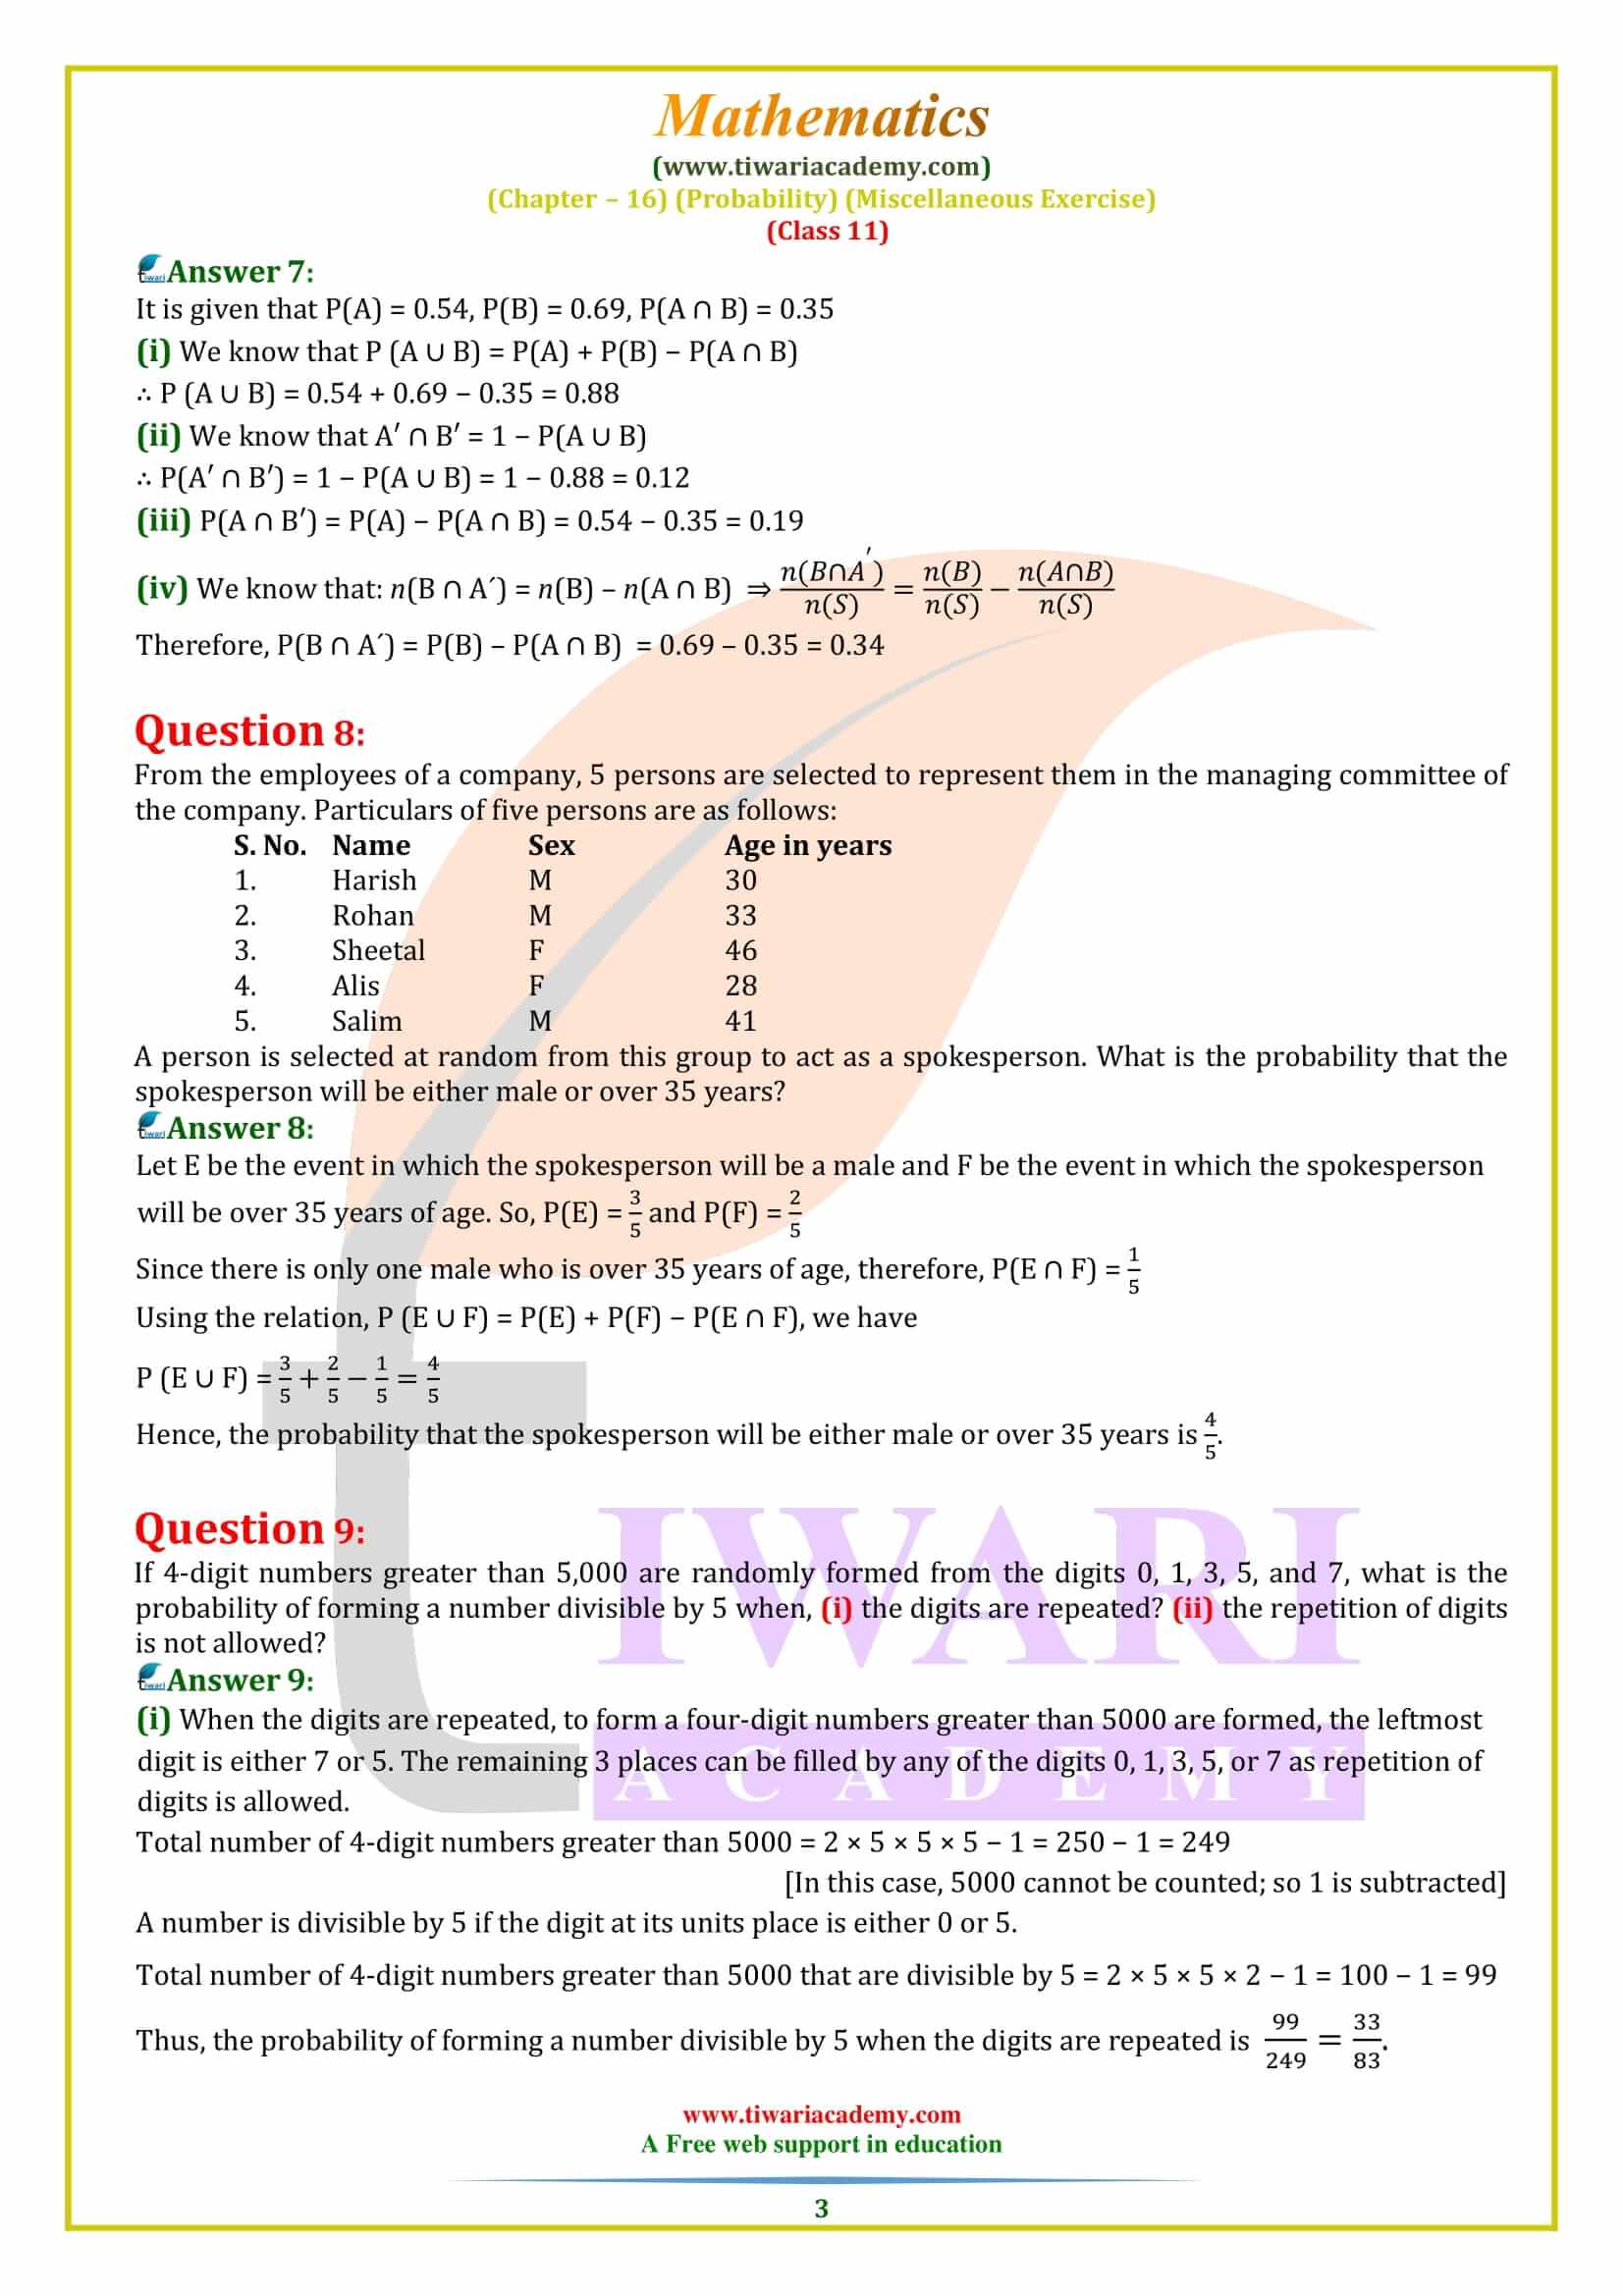 NCERT Solutions for Class 11 Maths Chapter 16 Miscellaneous Exercise in PDF